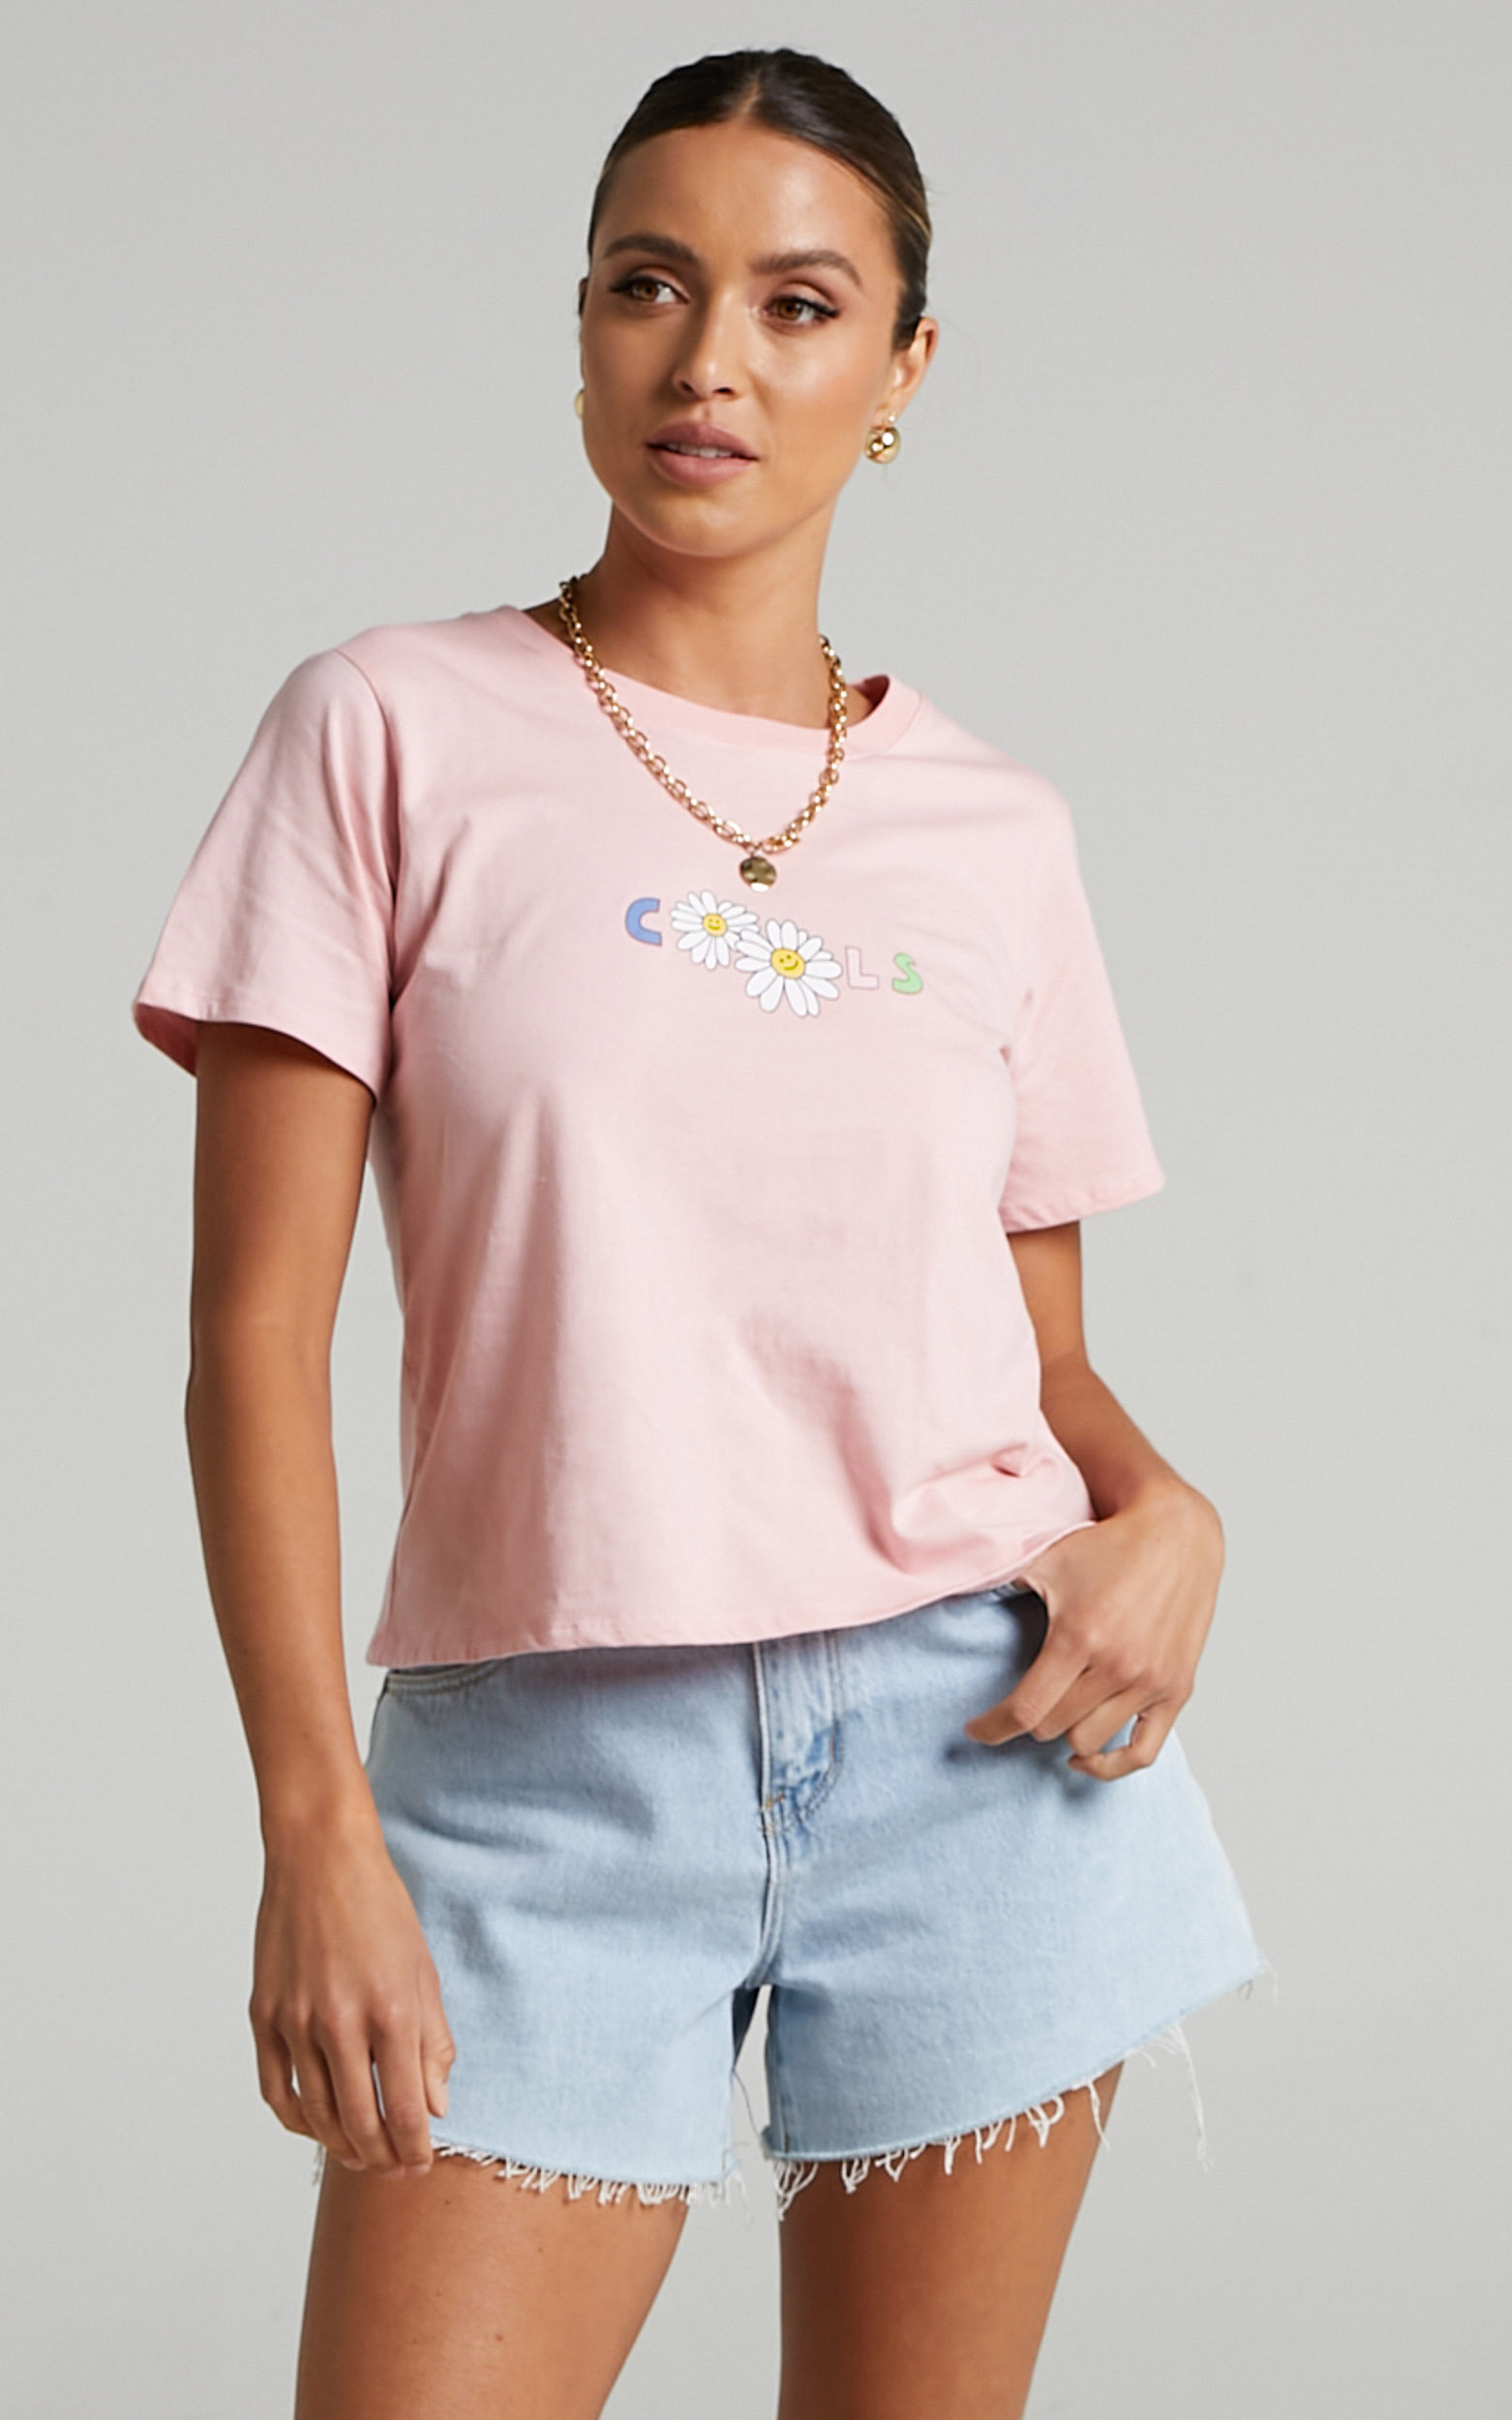 Cools Club - Daisy Club Tee in Pink - 06, PNK1, hi-res image number null